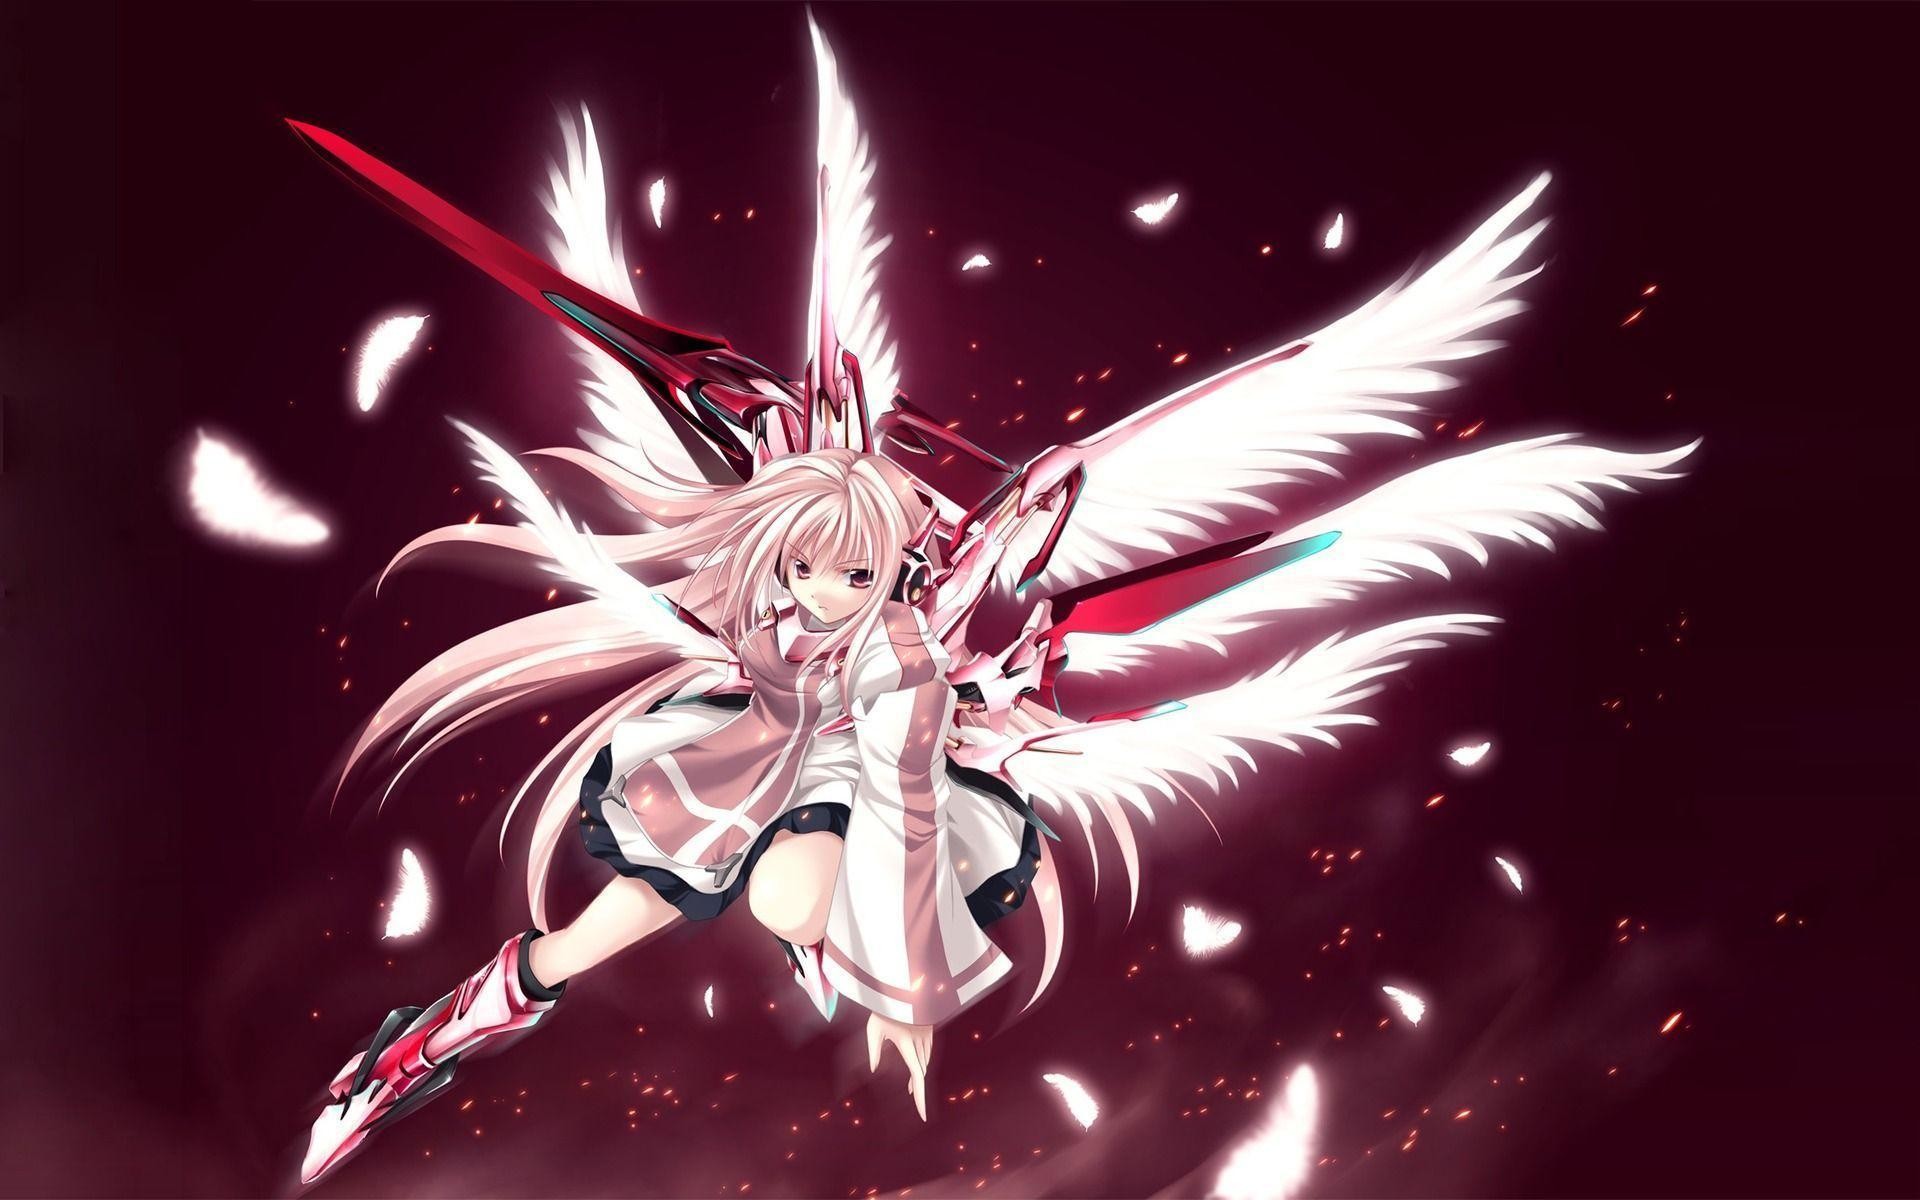 Anime Girl With Pink Hair And Wings - HD Wallpaper 